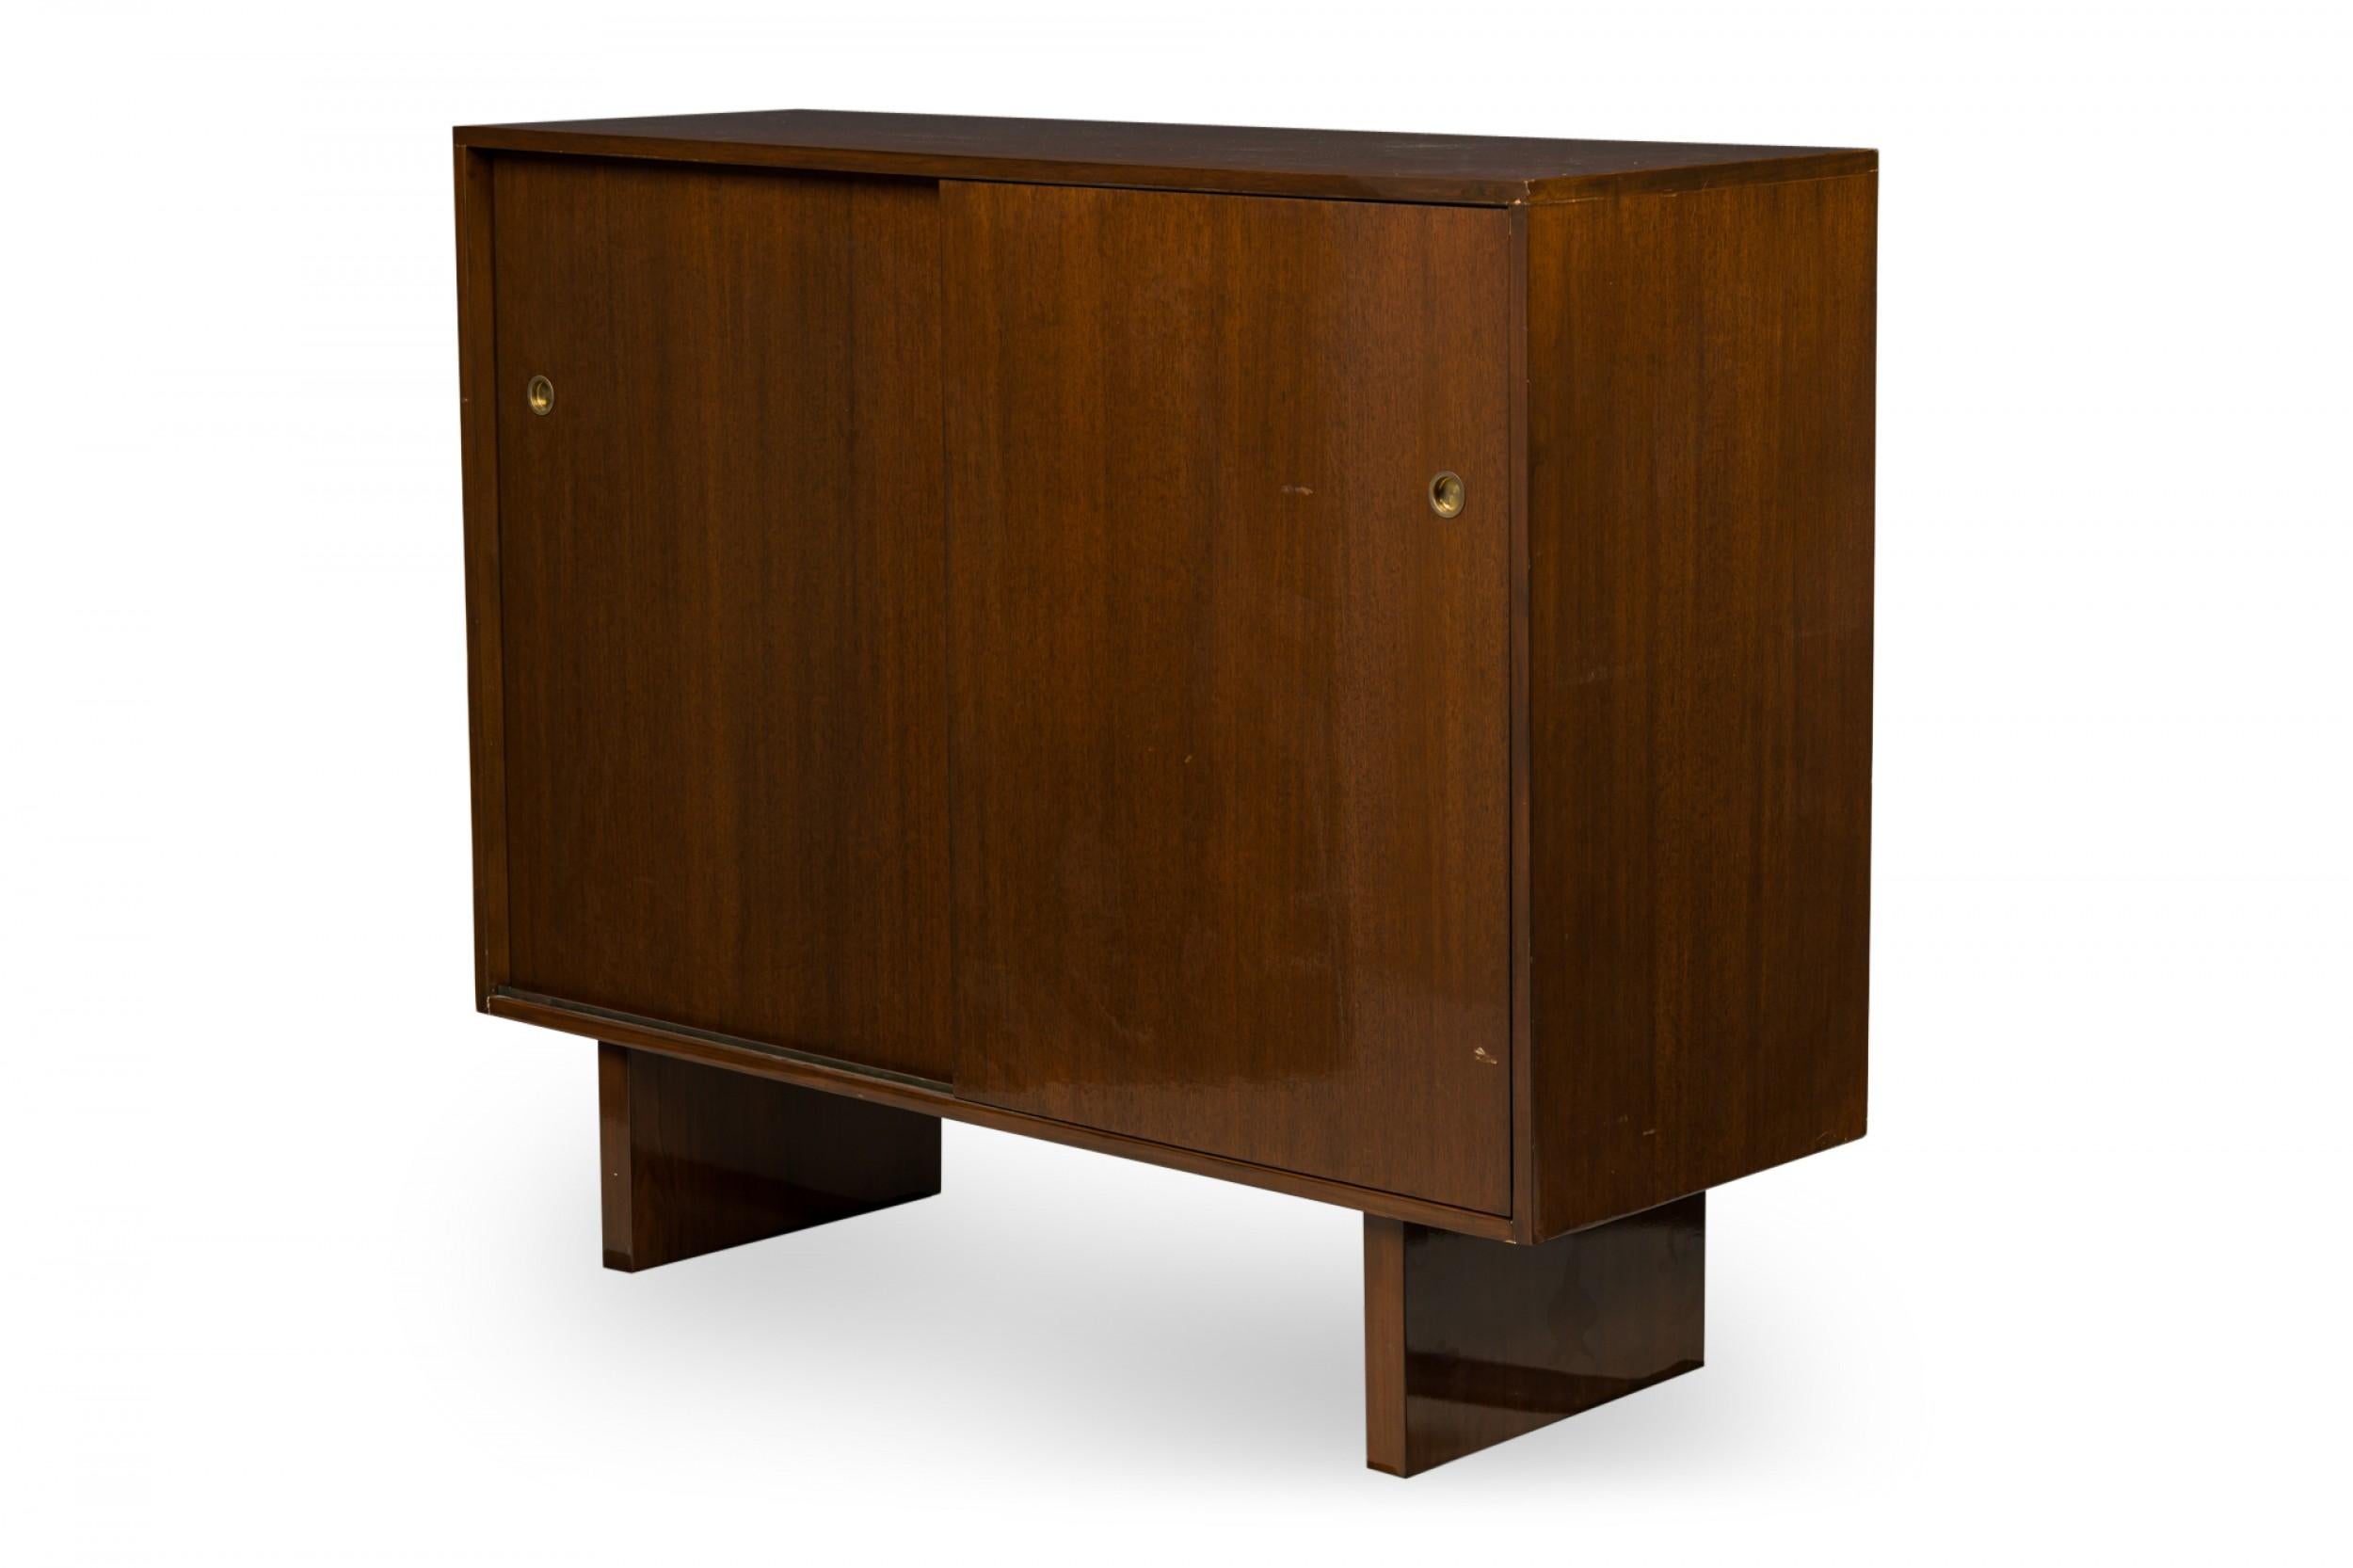 American Mid-Century Modern mahogany cabinet with two sliding doors with inset brass ring door pulls, which slide open to reveal a multi-compartment interior with pull out drawers, resting on two wide plank legs. (T.H. ROBSJOHN-GIBBINGS).